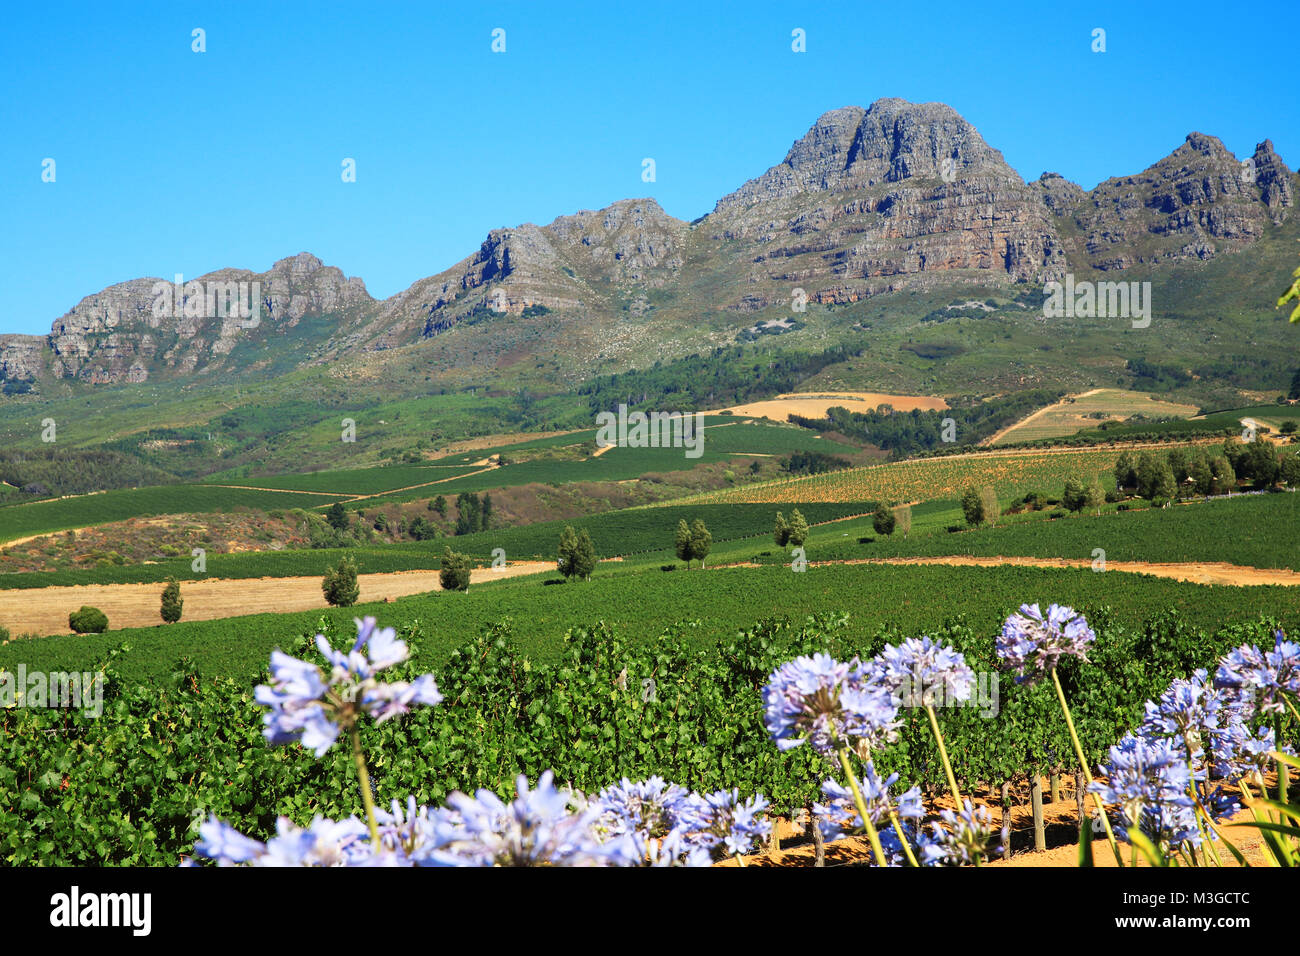 View of the mountain topped vineyards in the Cape Winelands around Stellenbosch, near Cape Town, South Africa Stock Photo